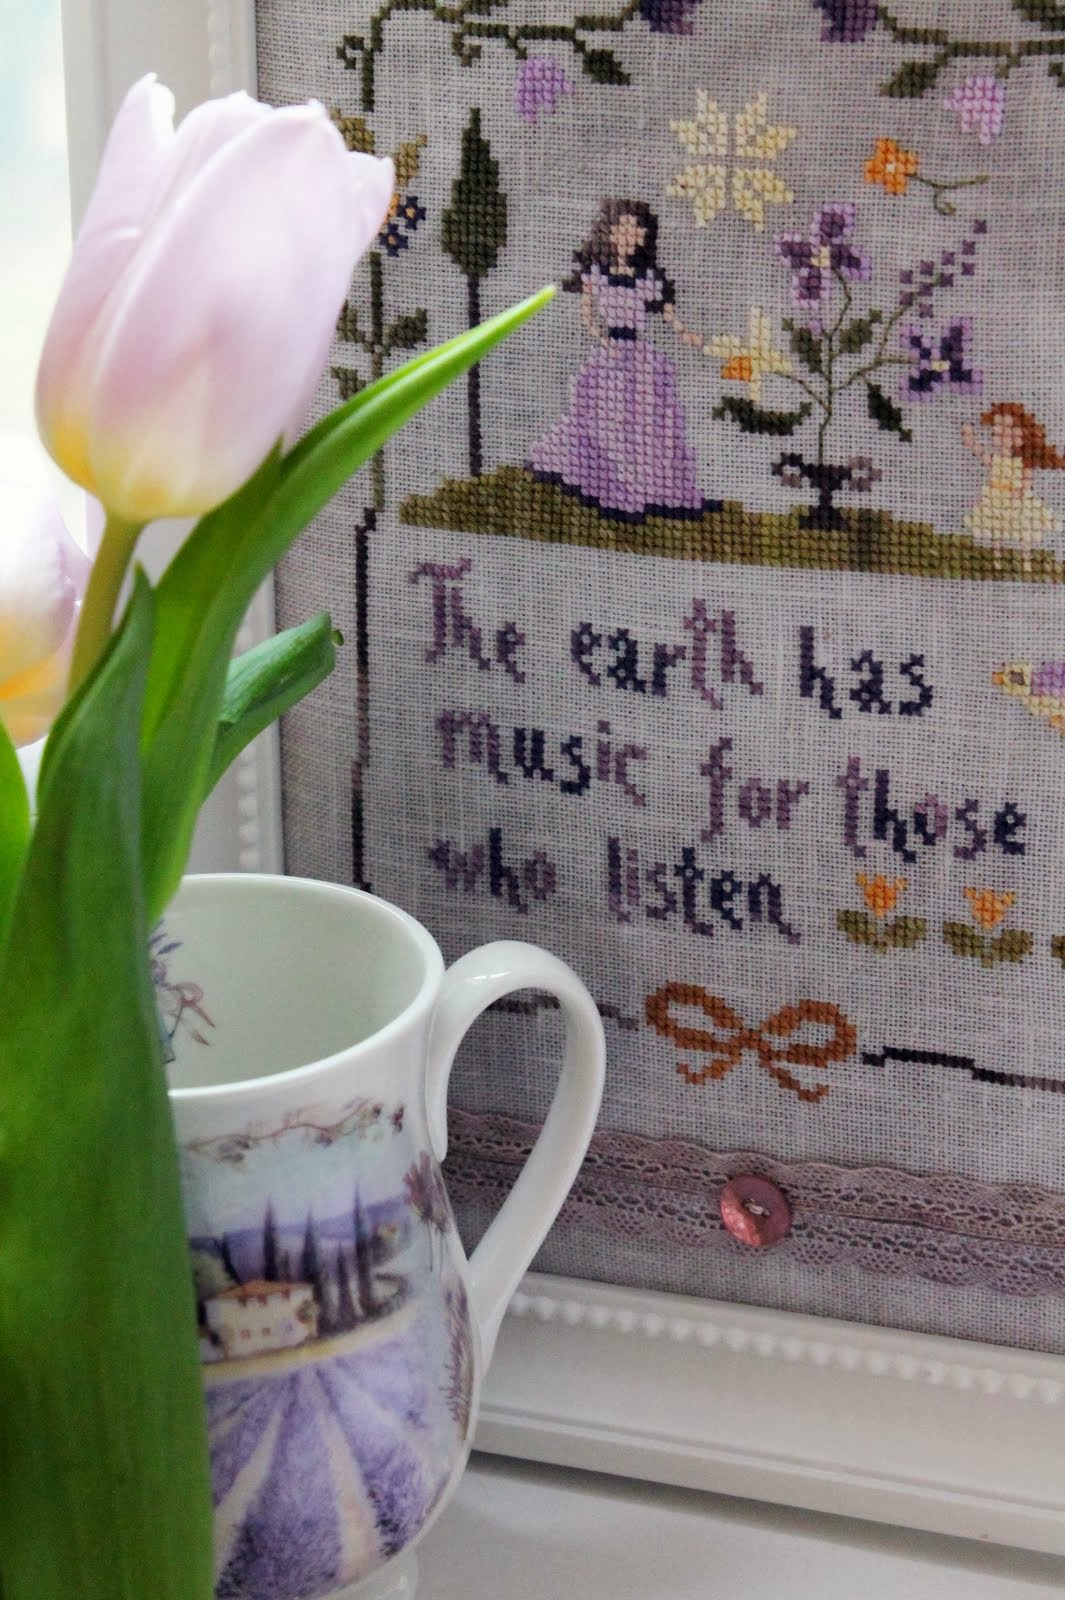 The Earth Has Music